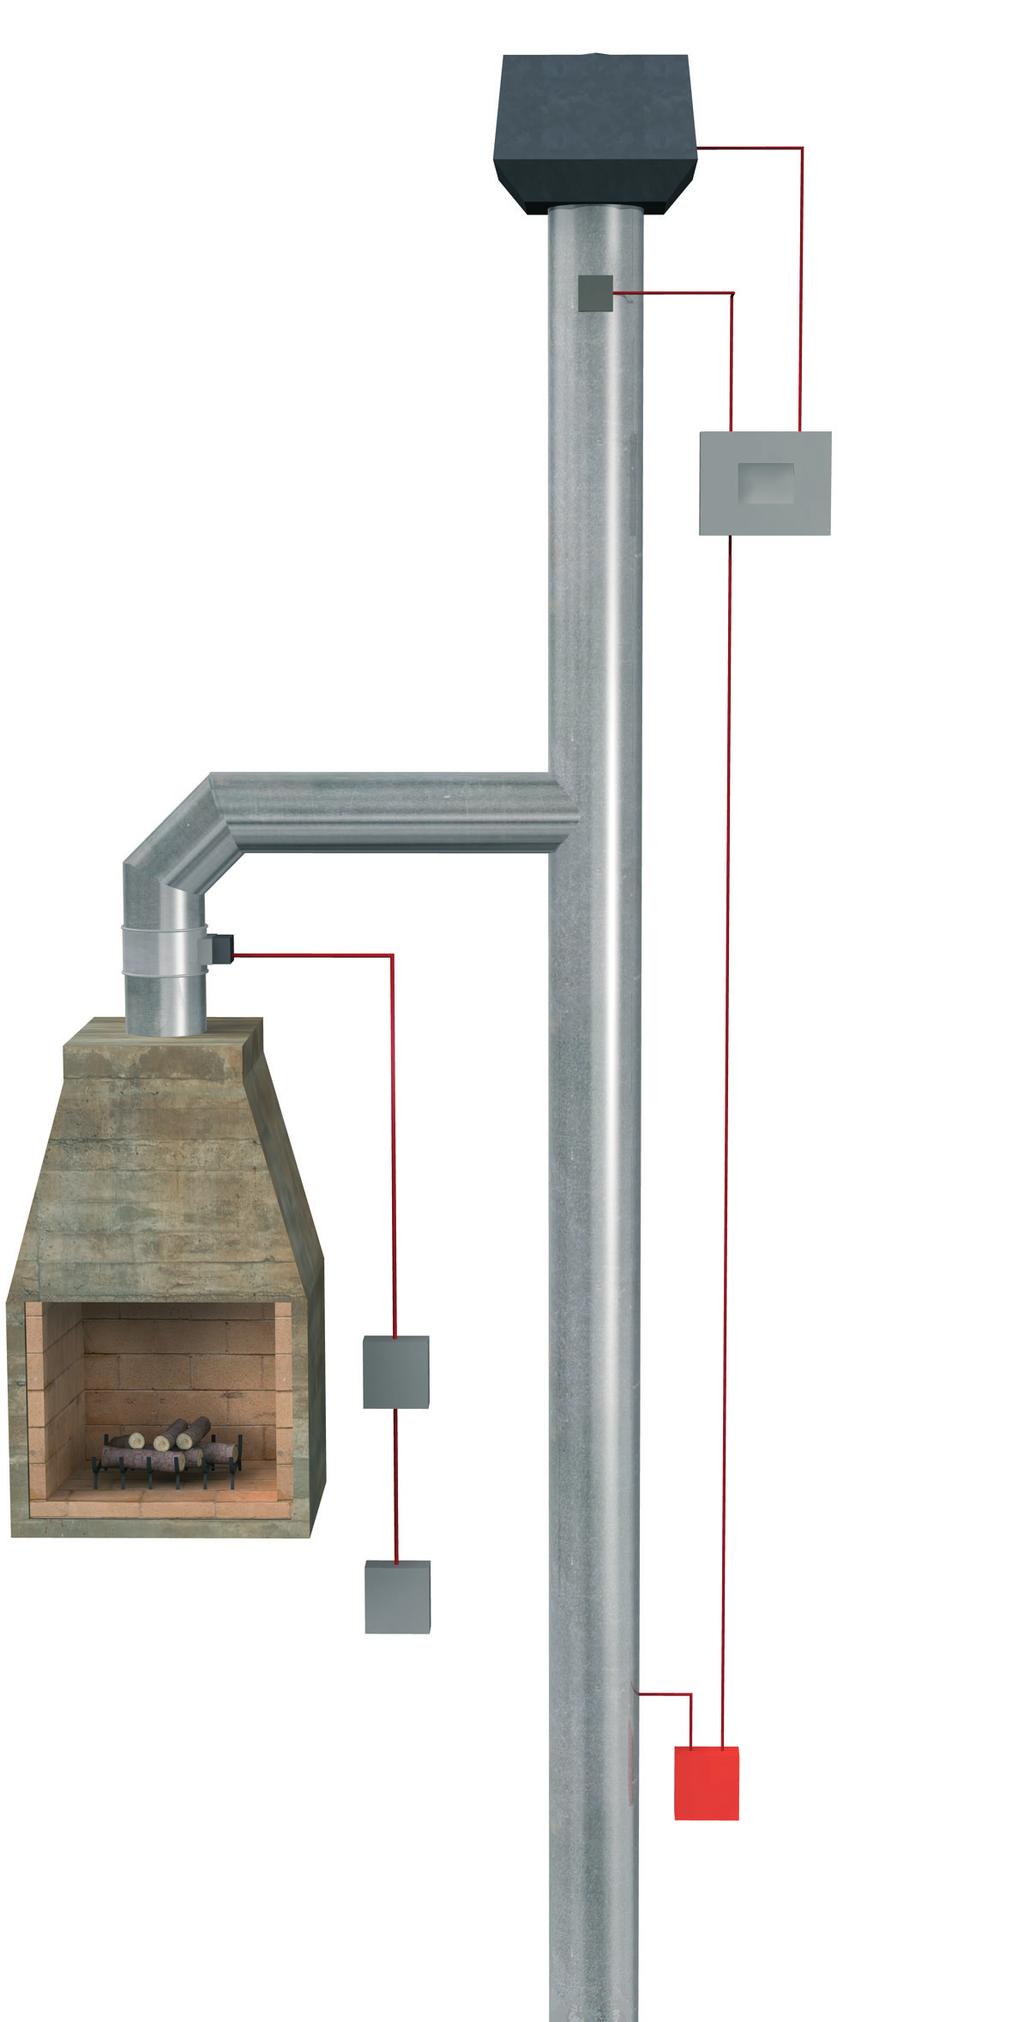 ENERVEX Venting System Components Fireplaces are a popular feature in multi-story